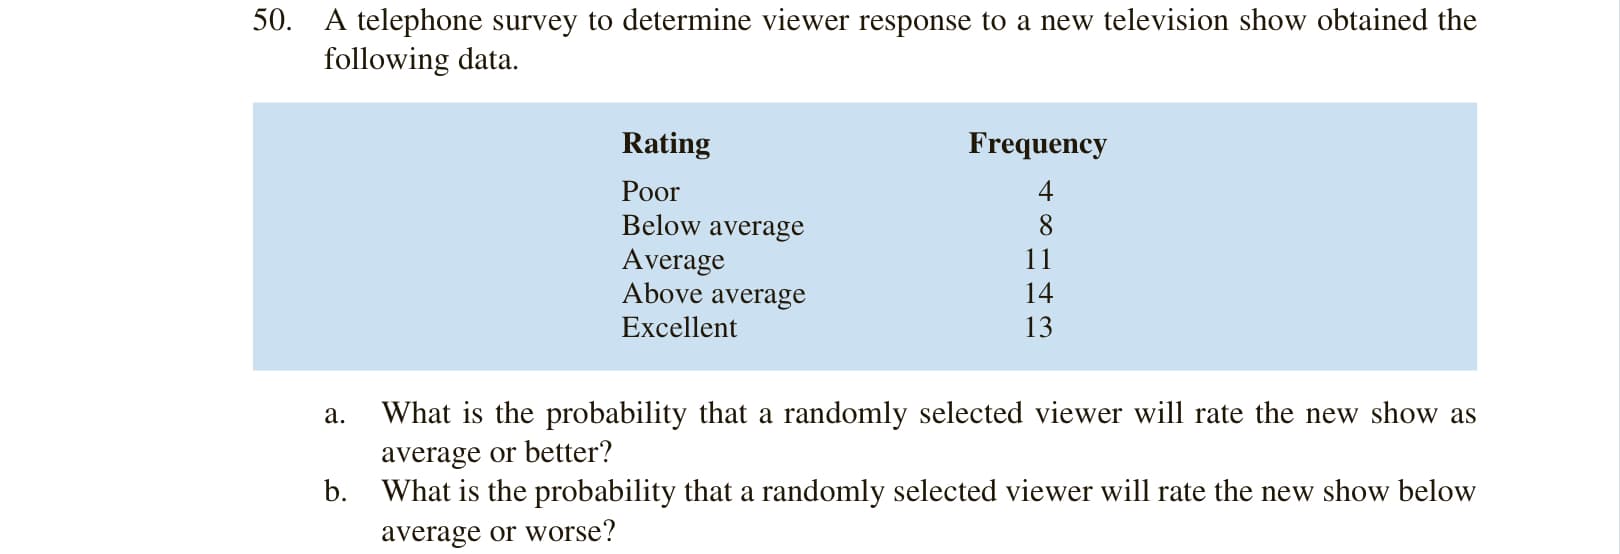 а.
What is the probability that a randomly selected viewer will rate the new show as
average or better?
b.
What is the probability that a randomly selected viewer will rate the new show below
average or worse?
